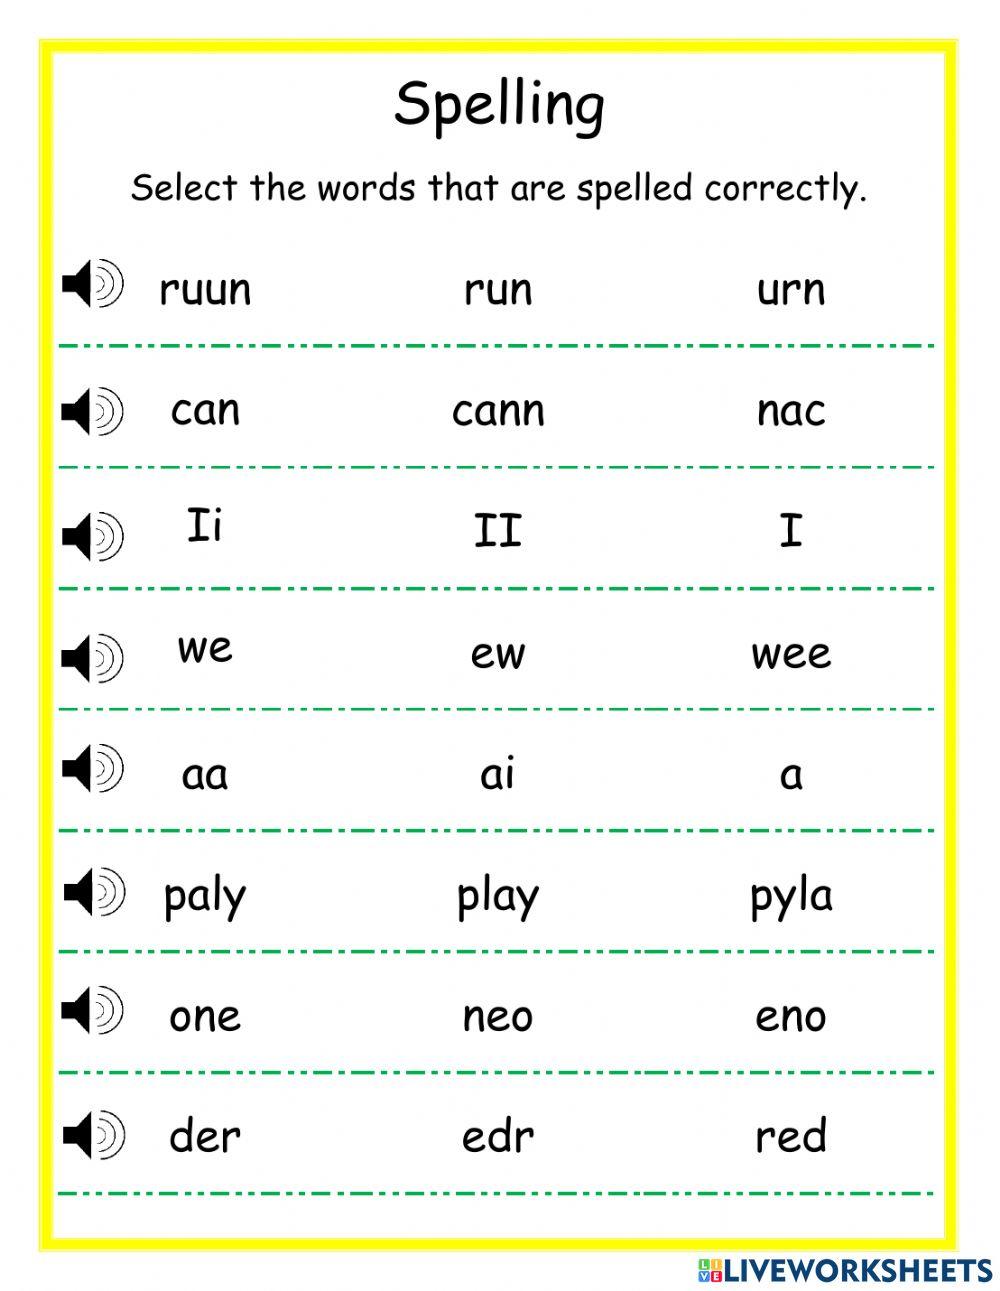 Spelling-select the word that is spelled correctly DJ online exercise for 1  | Live Worksheets